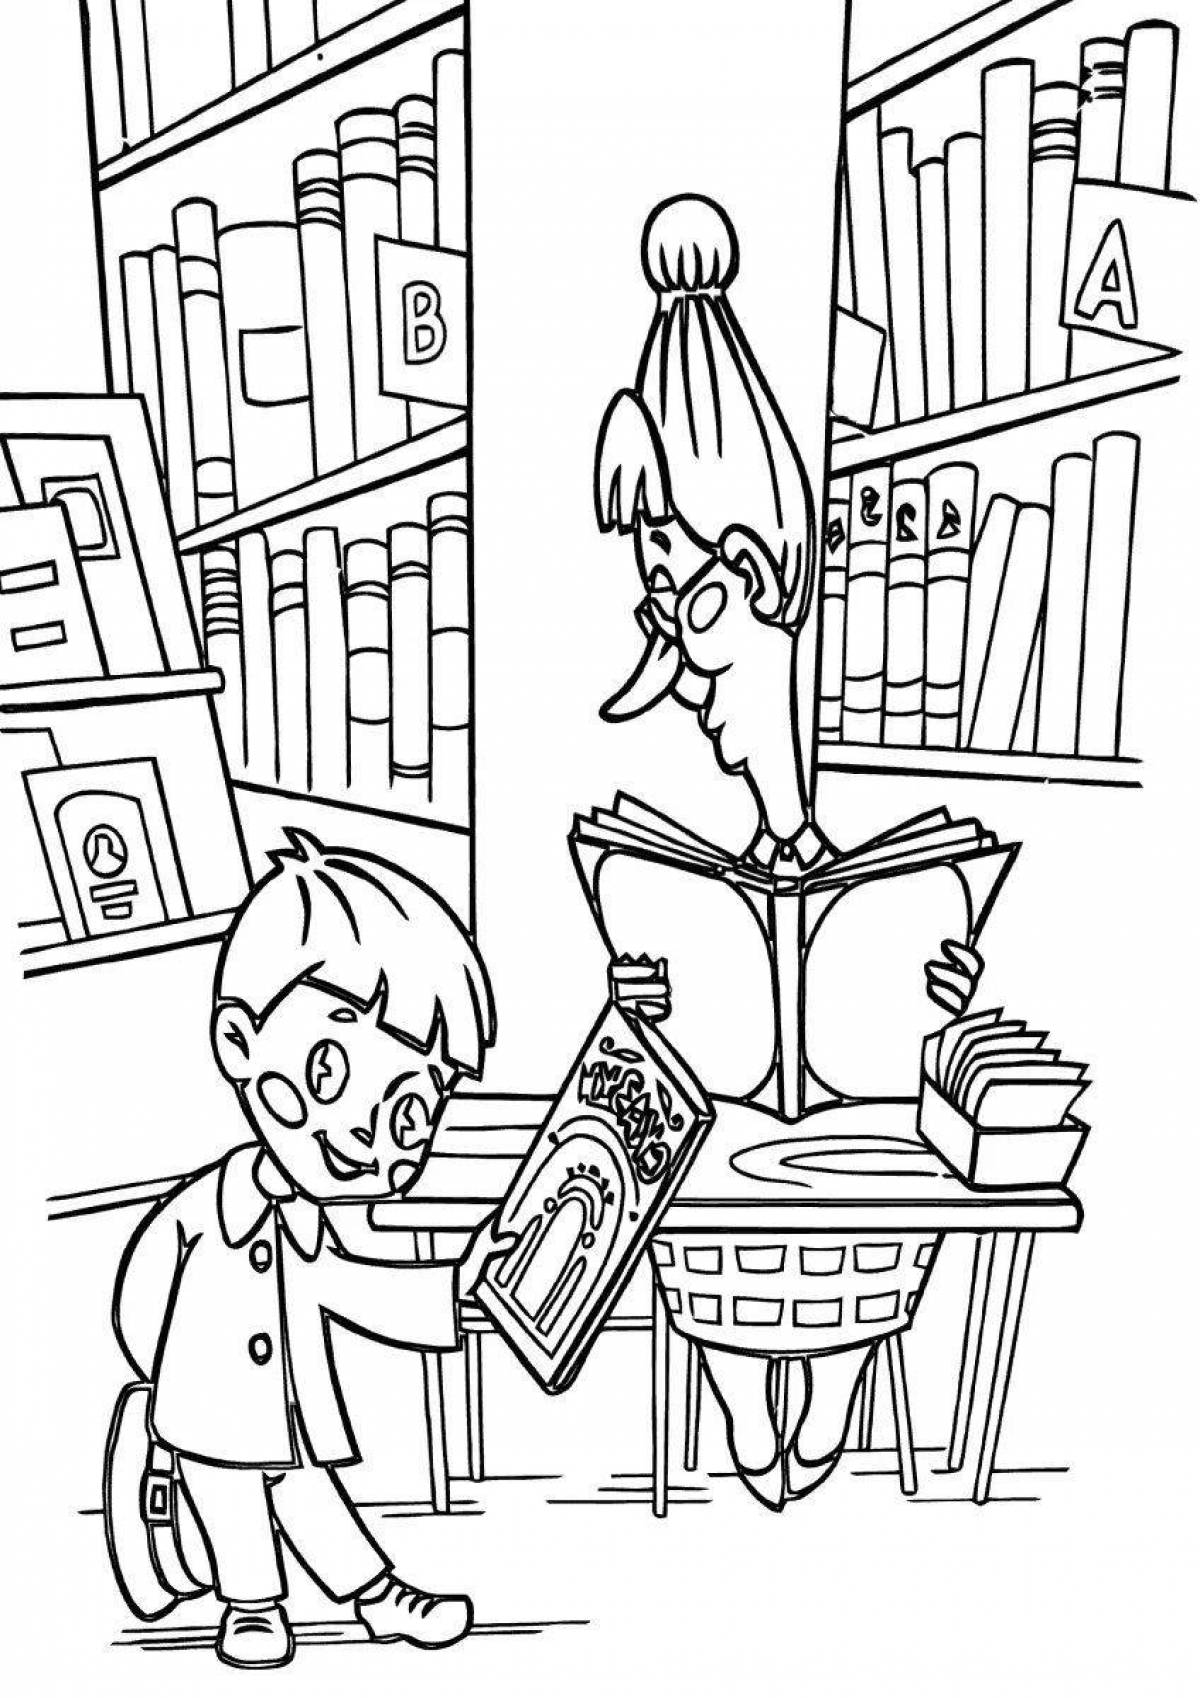 Crazy Library coloring page